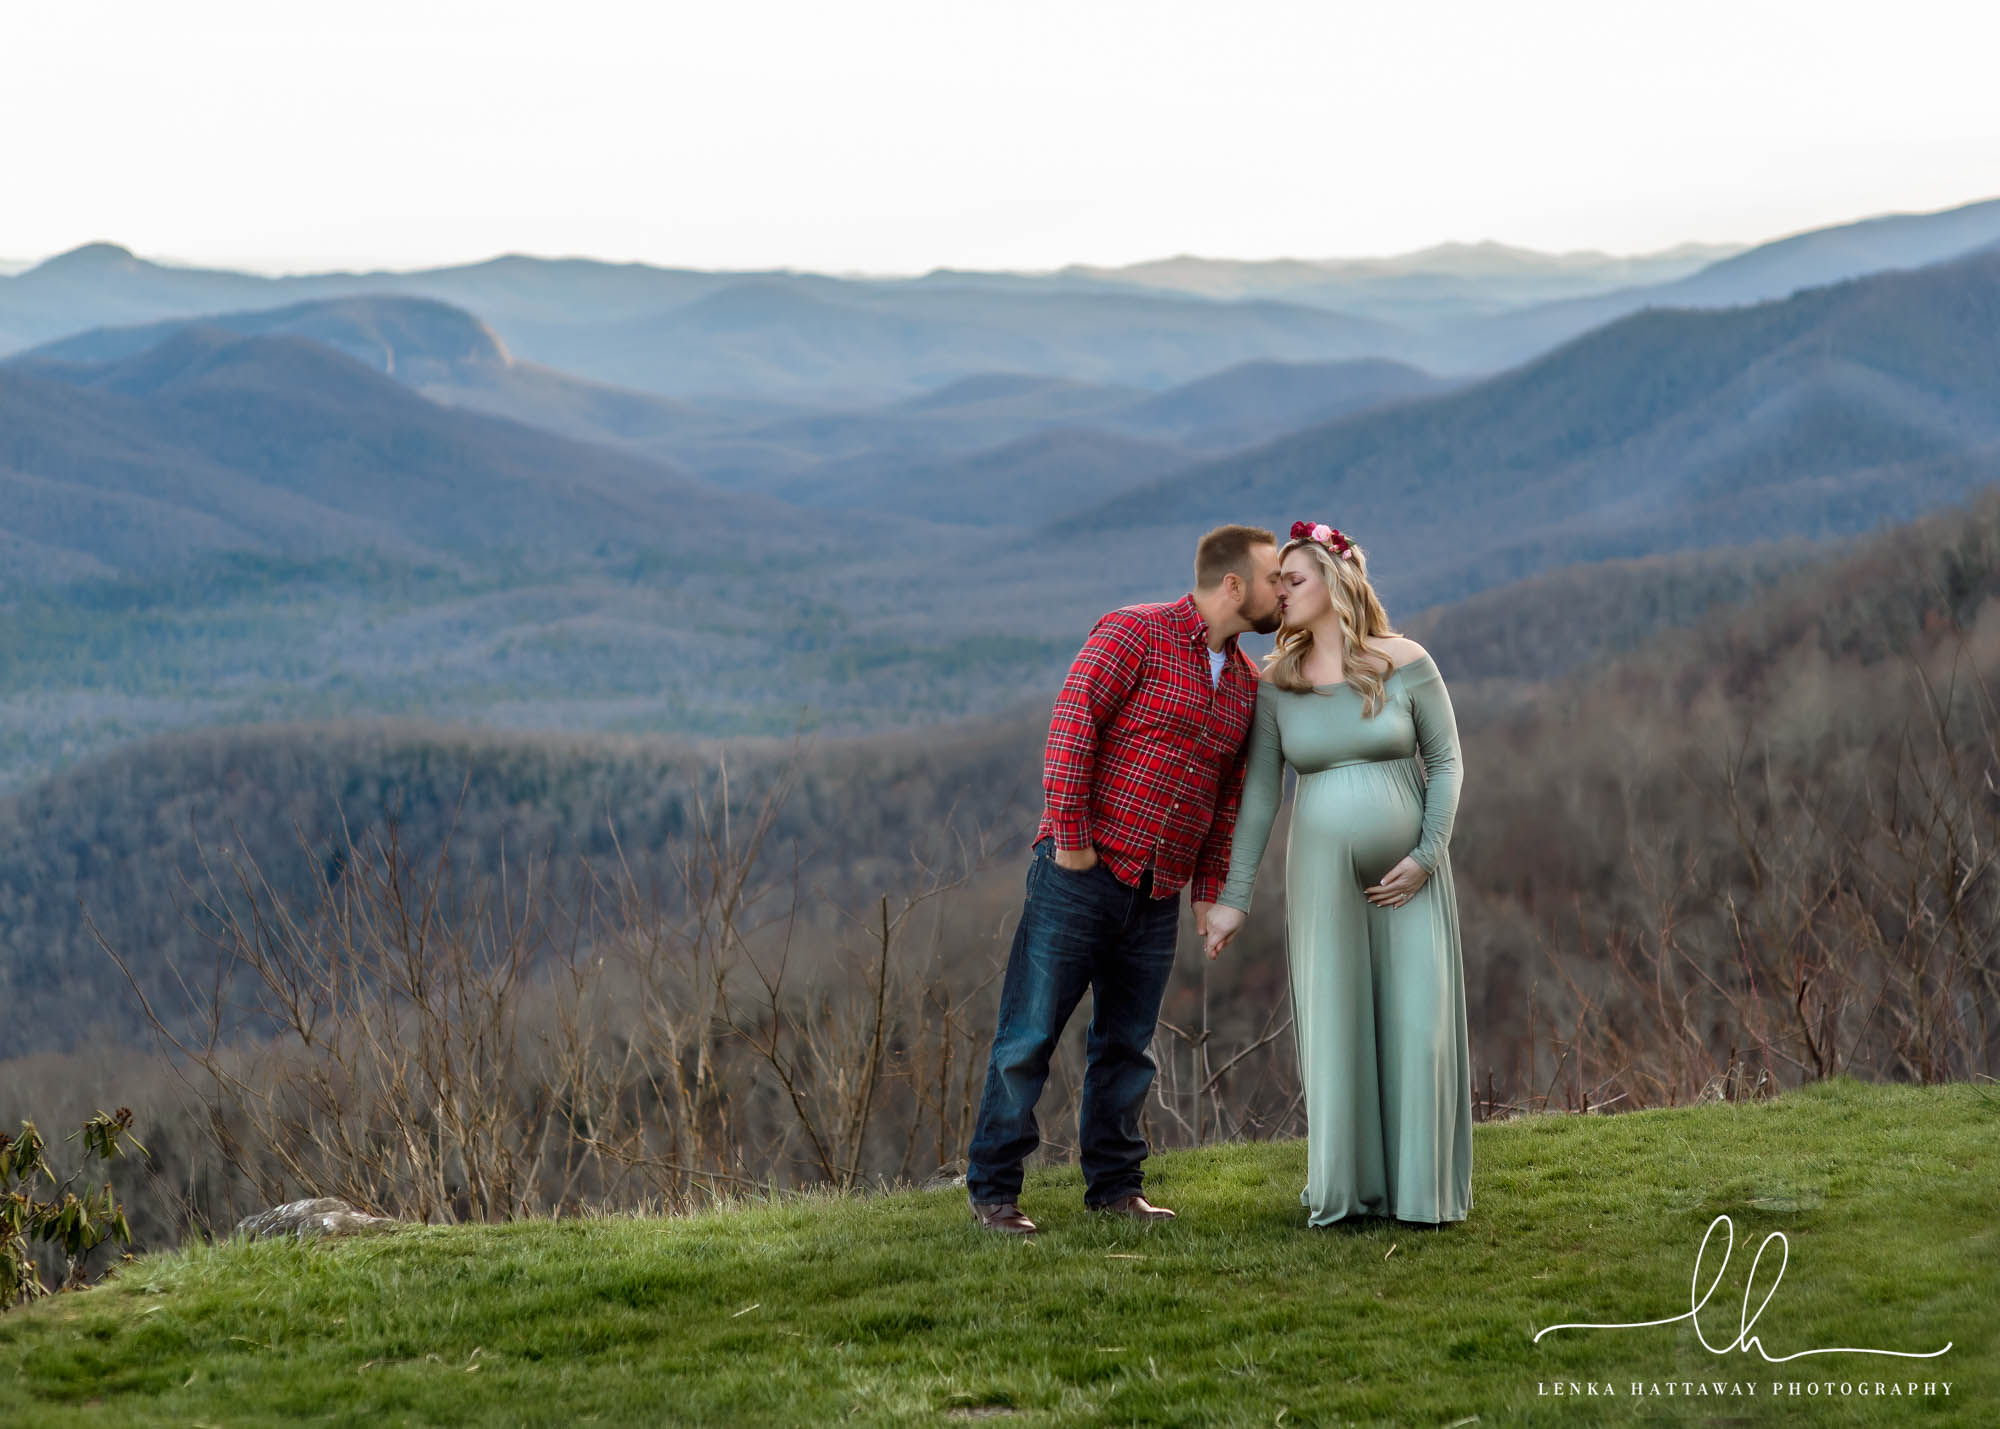 Couple kissing in a maternity photo in the mountains.